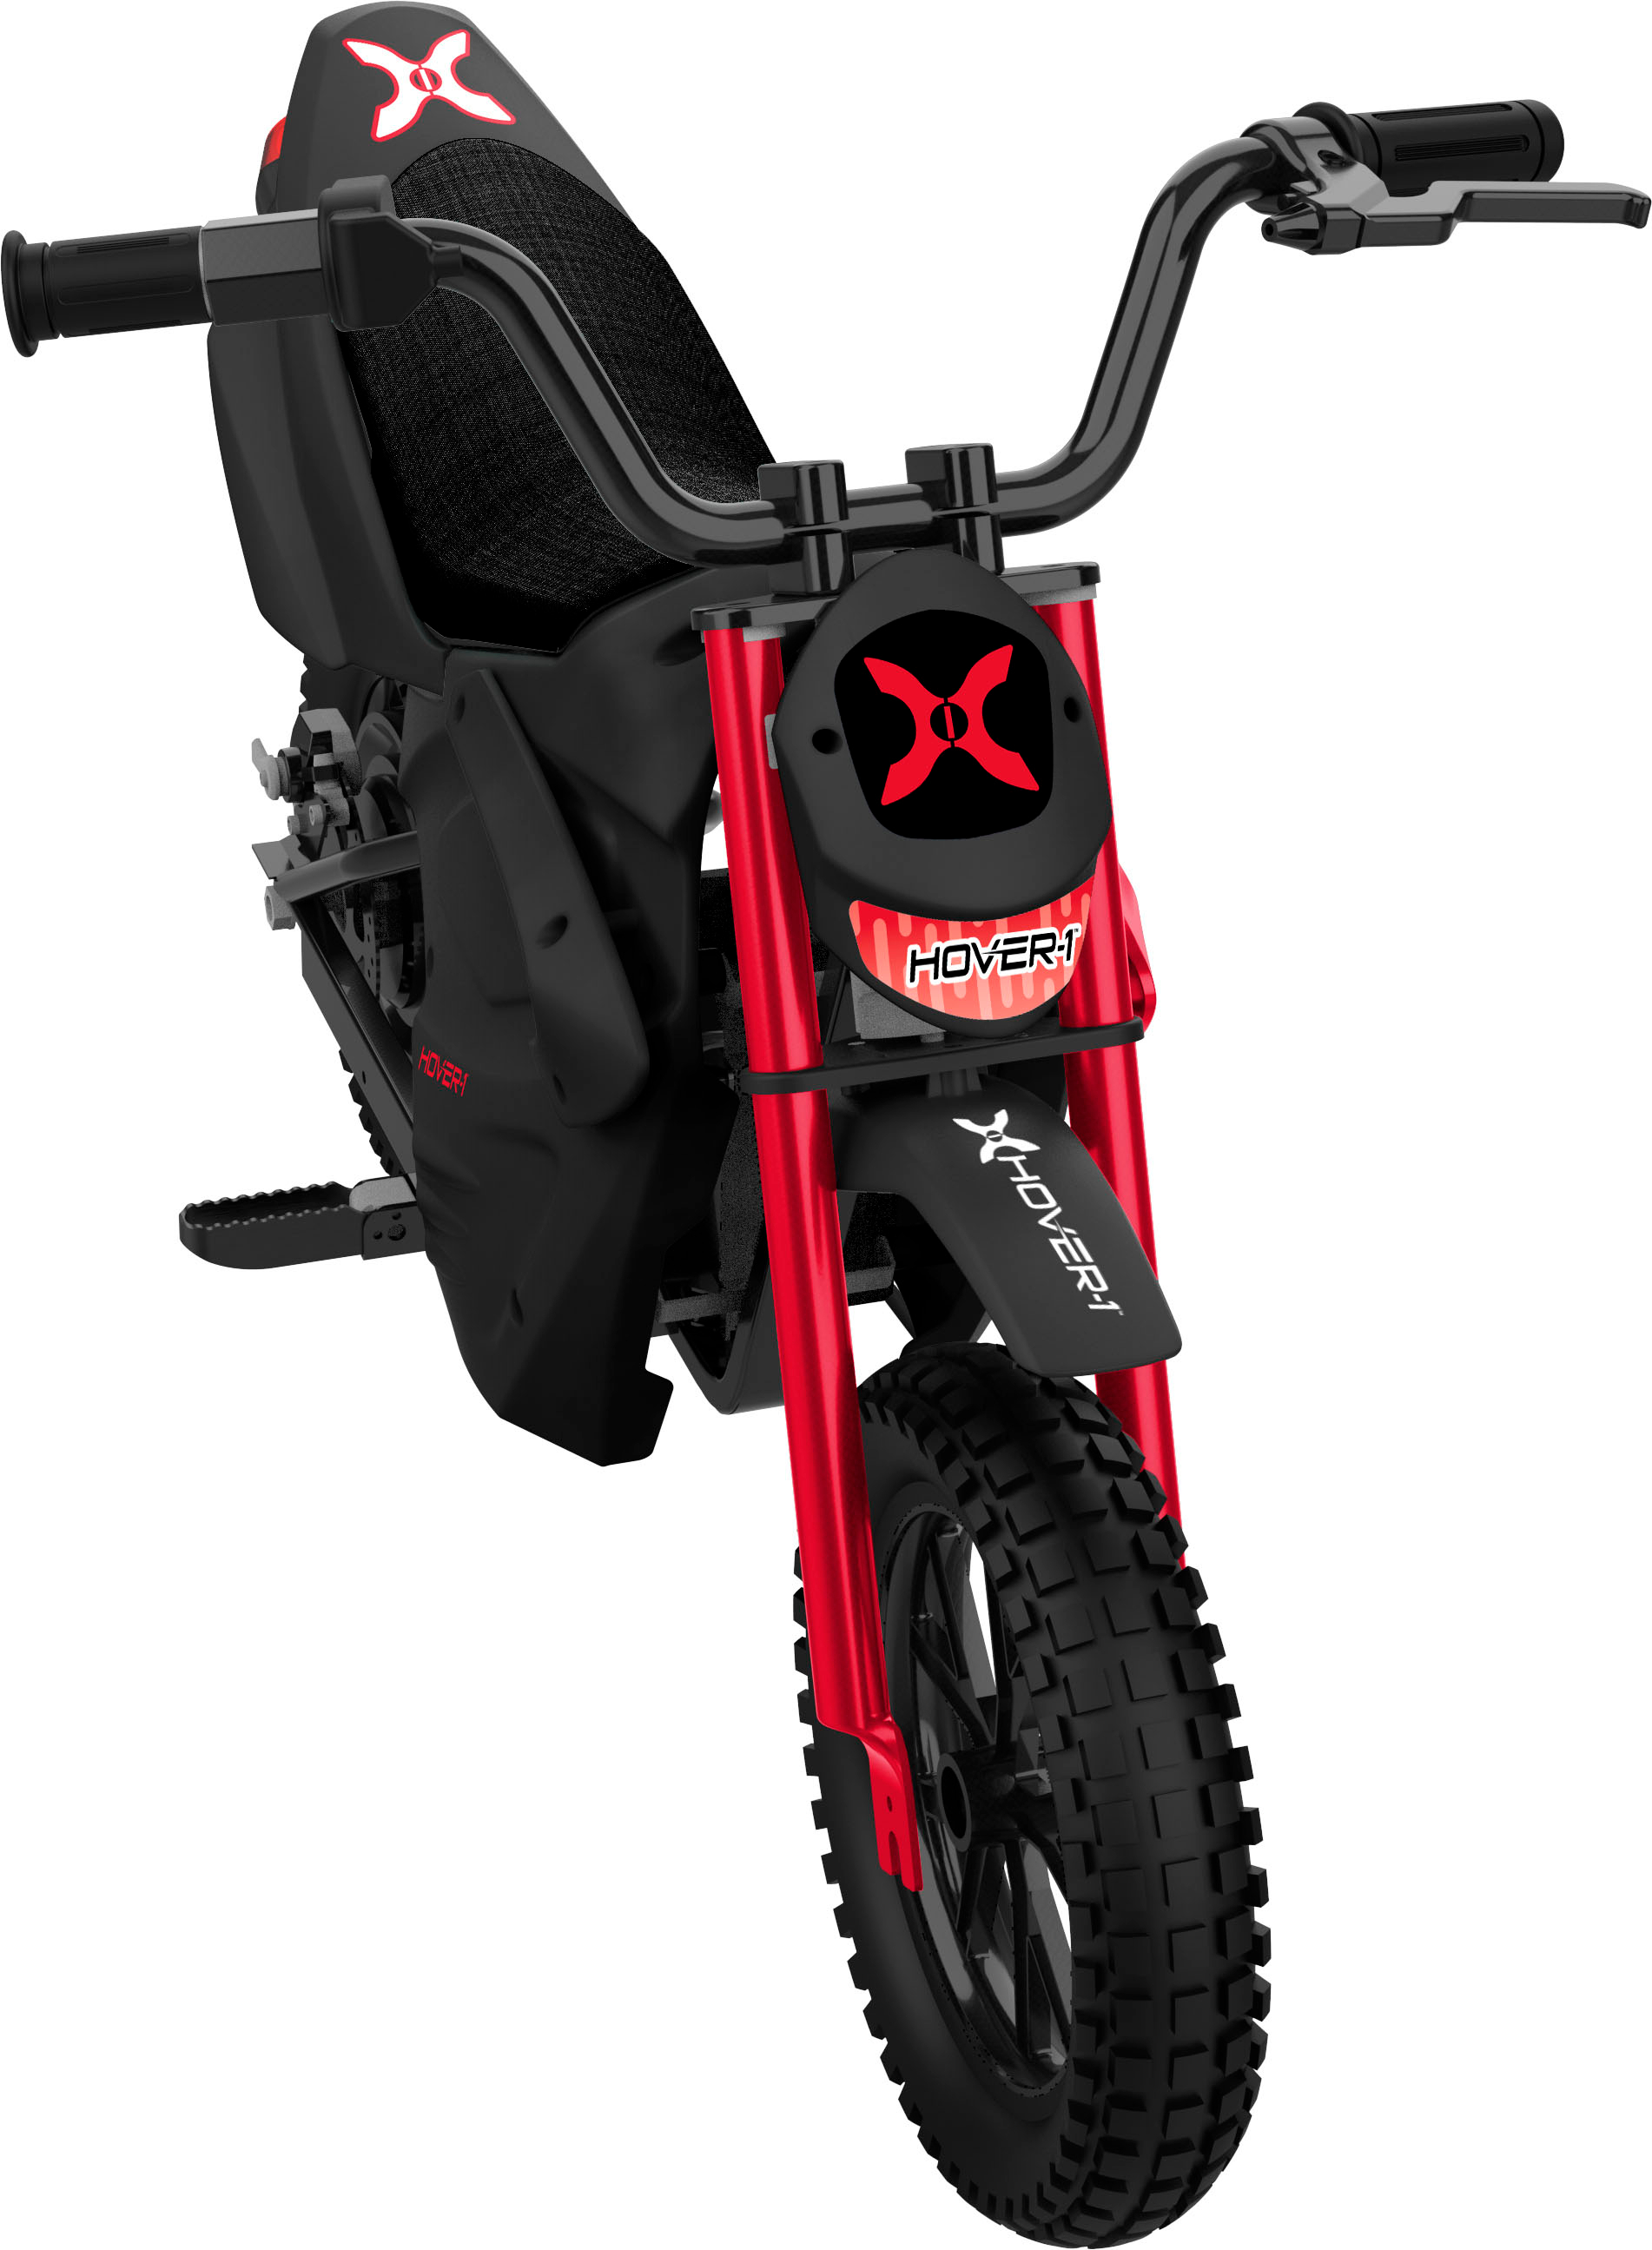 Left View: Hover-1 - Trak Electric Dirt Bike for Kids, Silent-chainless motor, Lithium-ion Battery, 9 mi Range, 9 mph Max Speed - Red